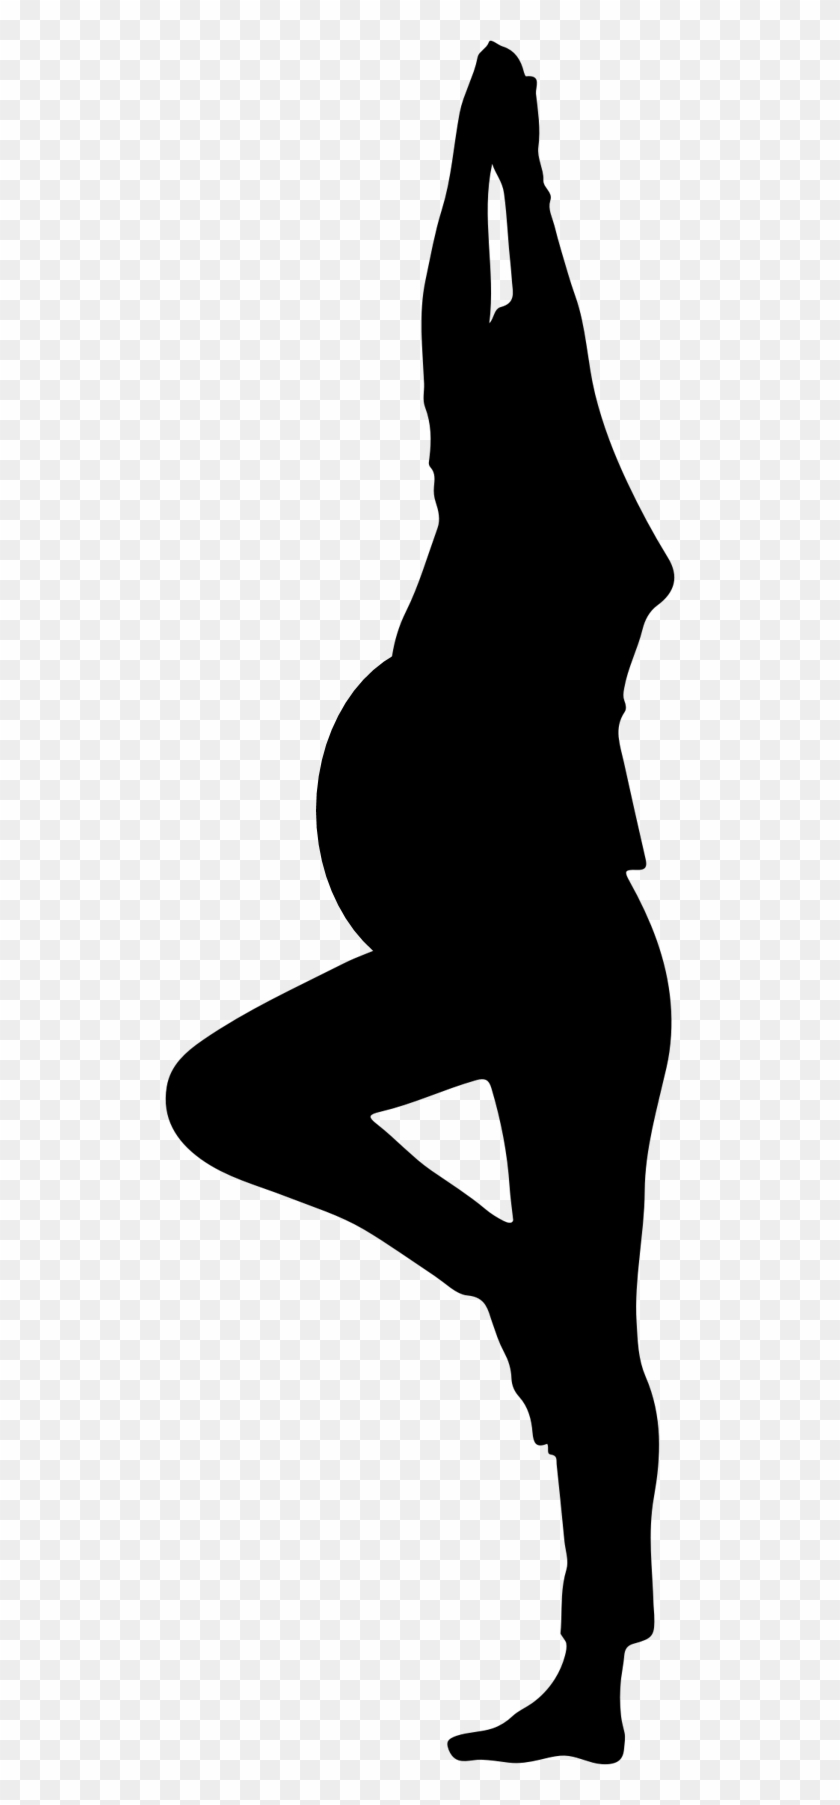 2nd/3rd Trimester Active Yoga And Stretch - Standing Yoga Poses Clip Art #916981